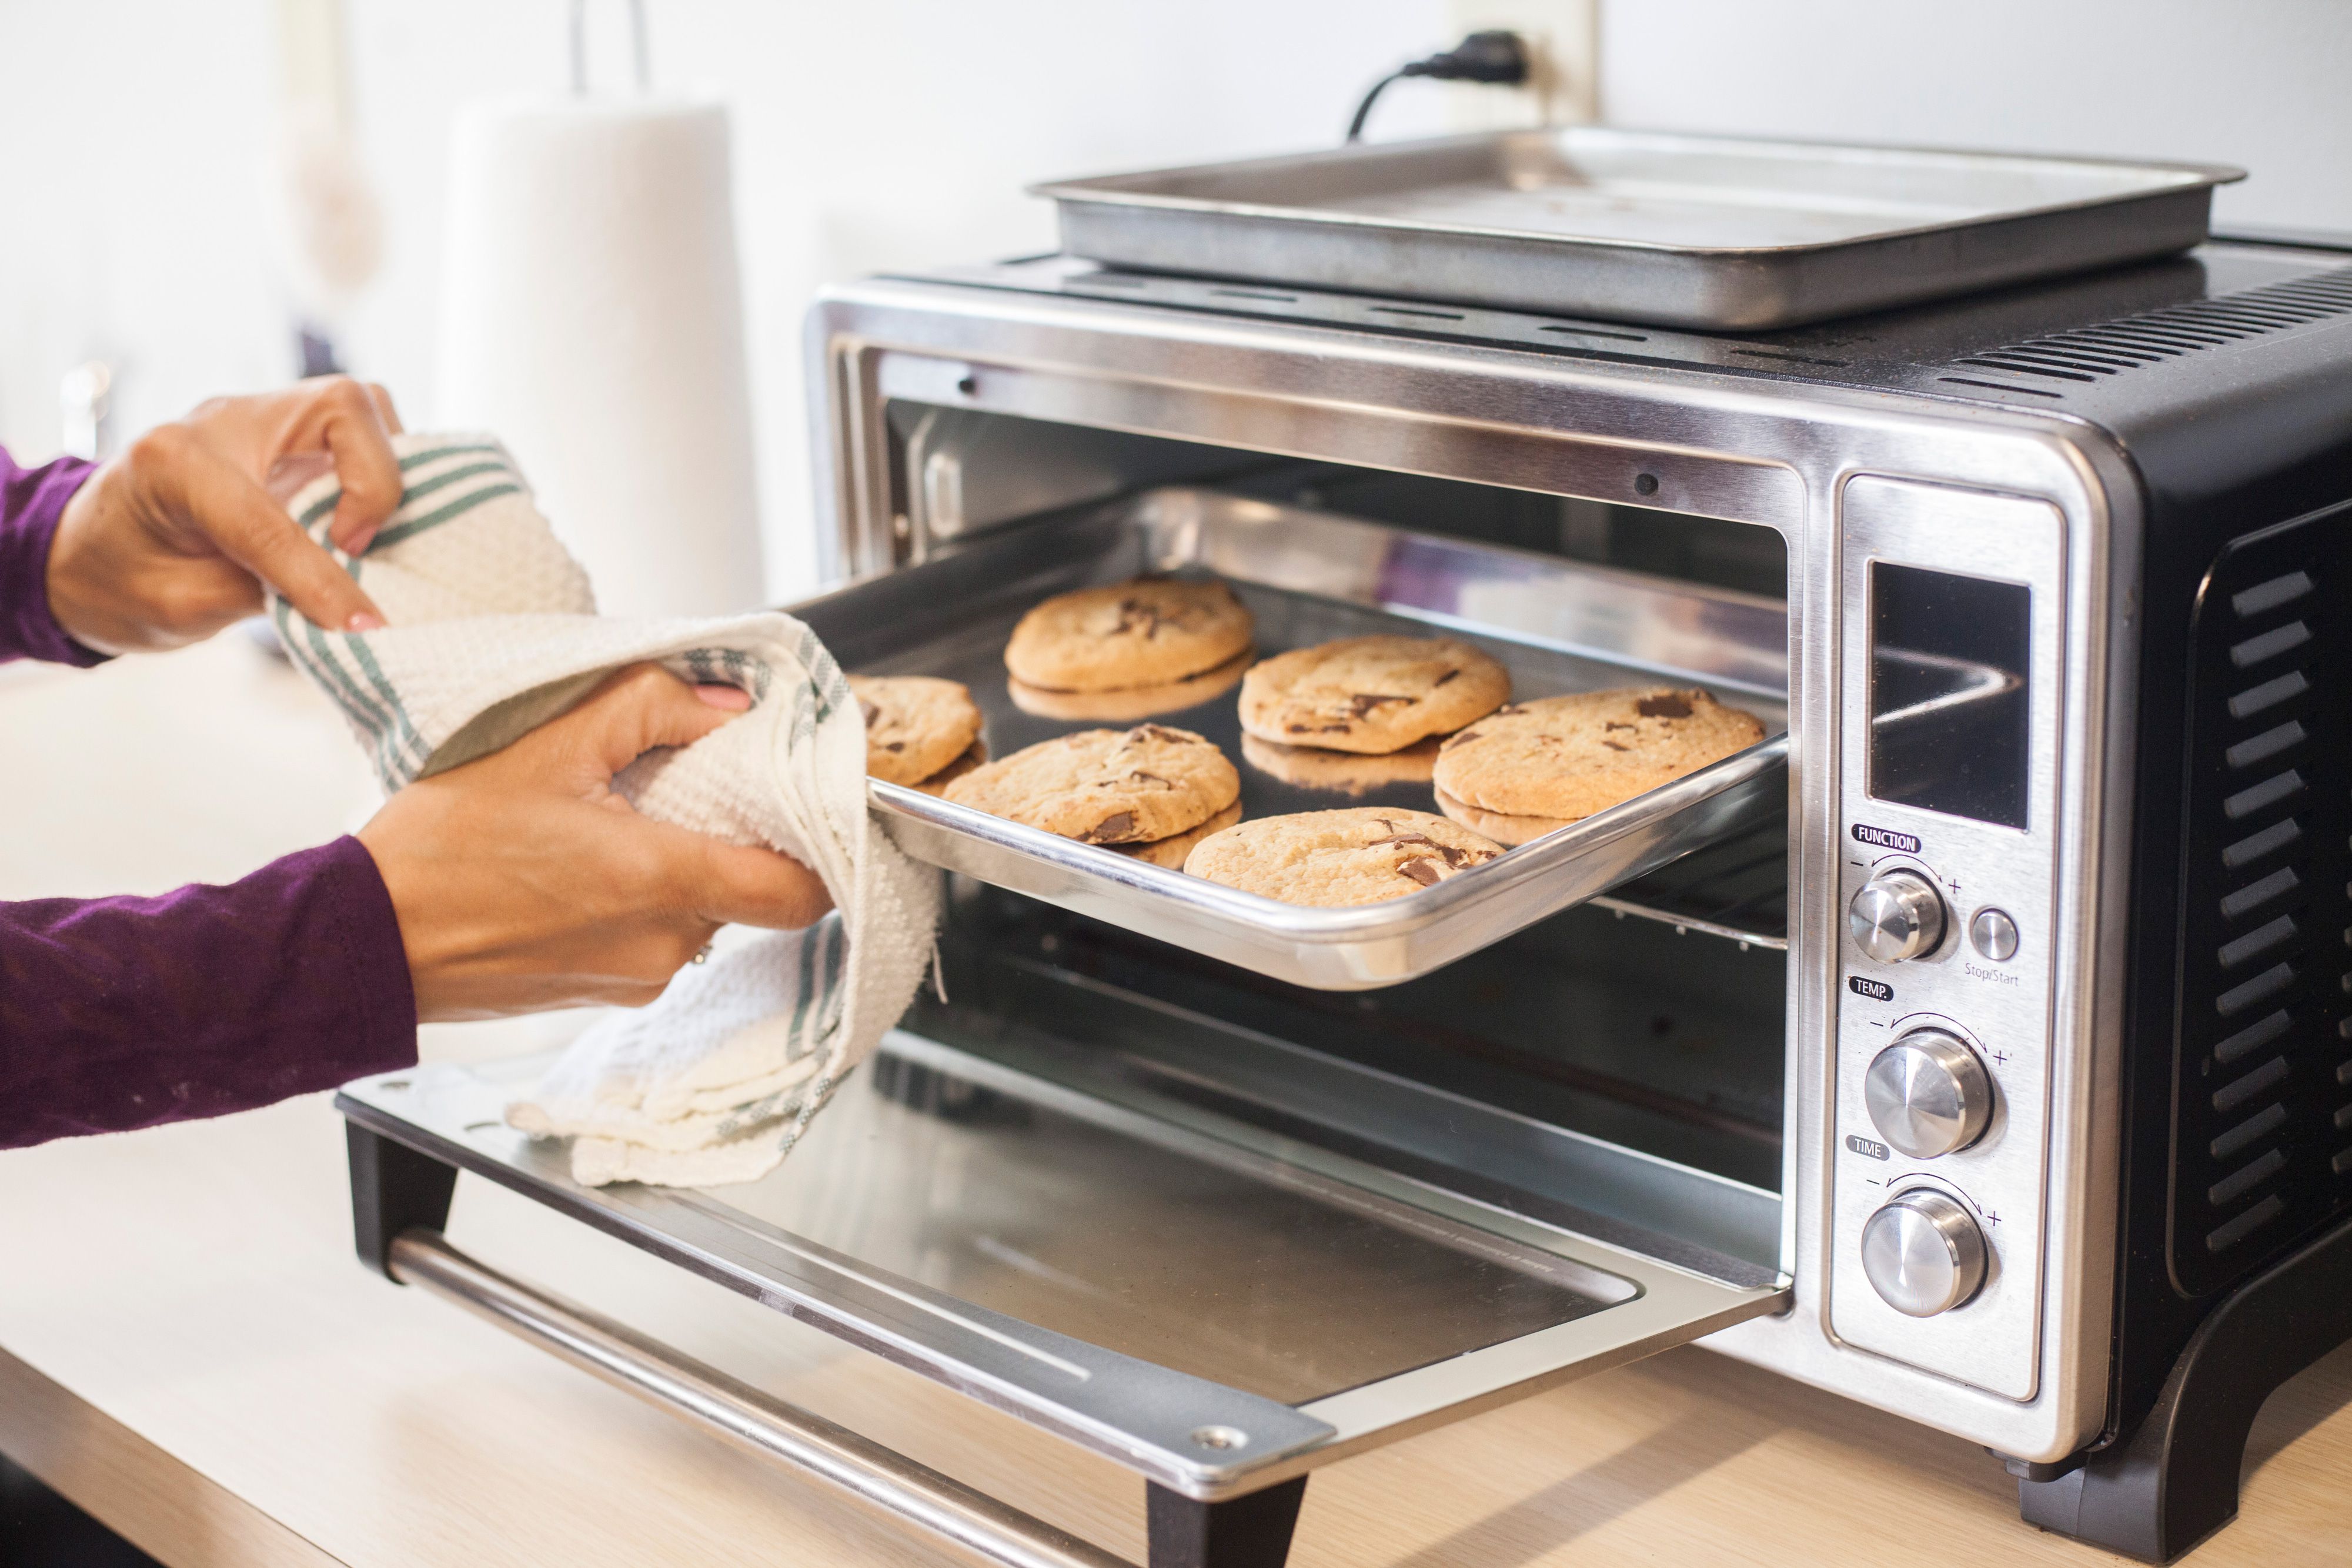 How To Use A Toaster Oven